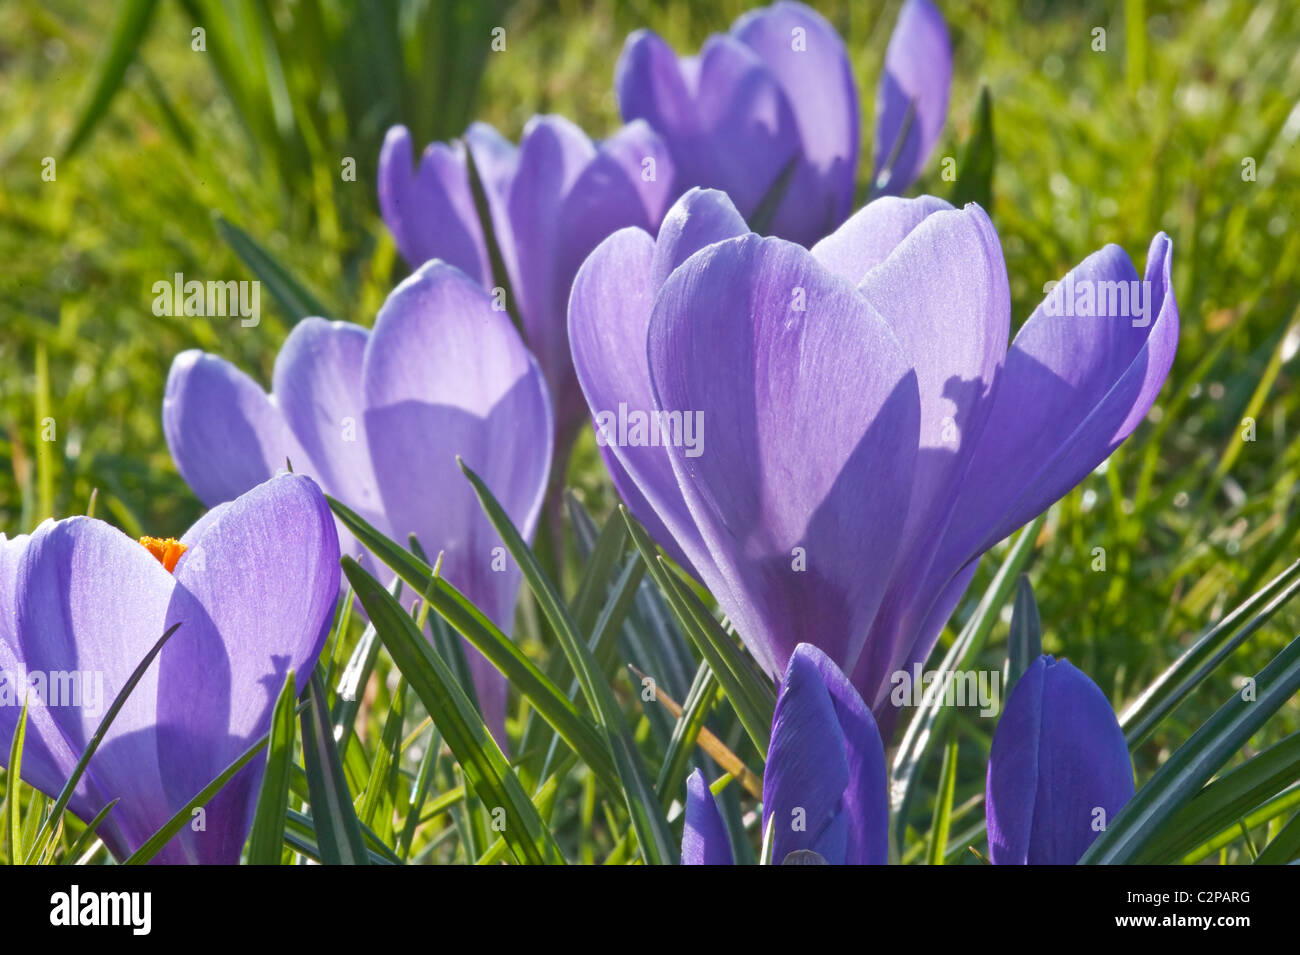 Fresh Spring crocus flower low view shallow depth of field Stock Photo